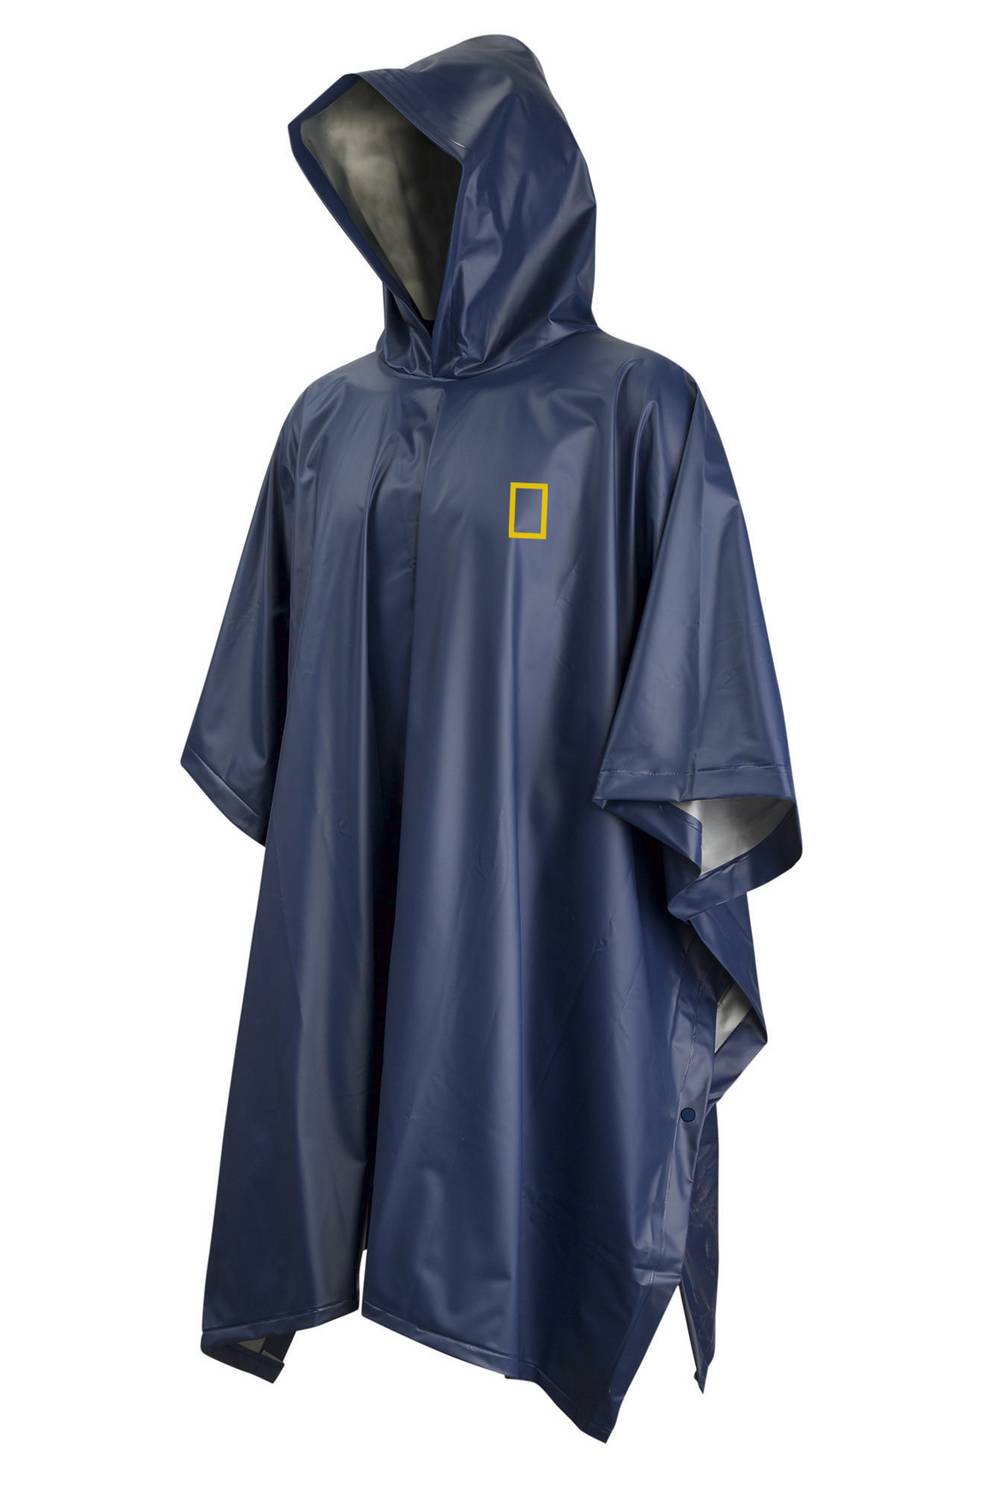 NATIONAL GEOGRAPHIC - Poncho impermeable azul